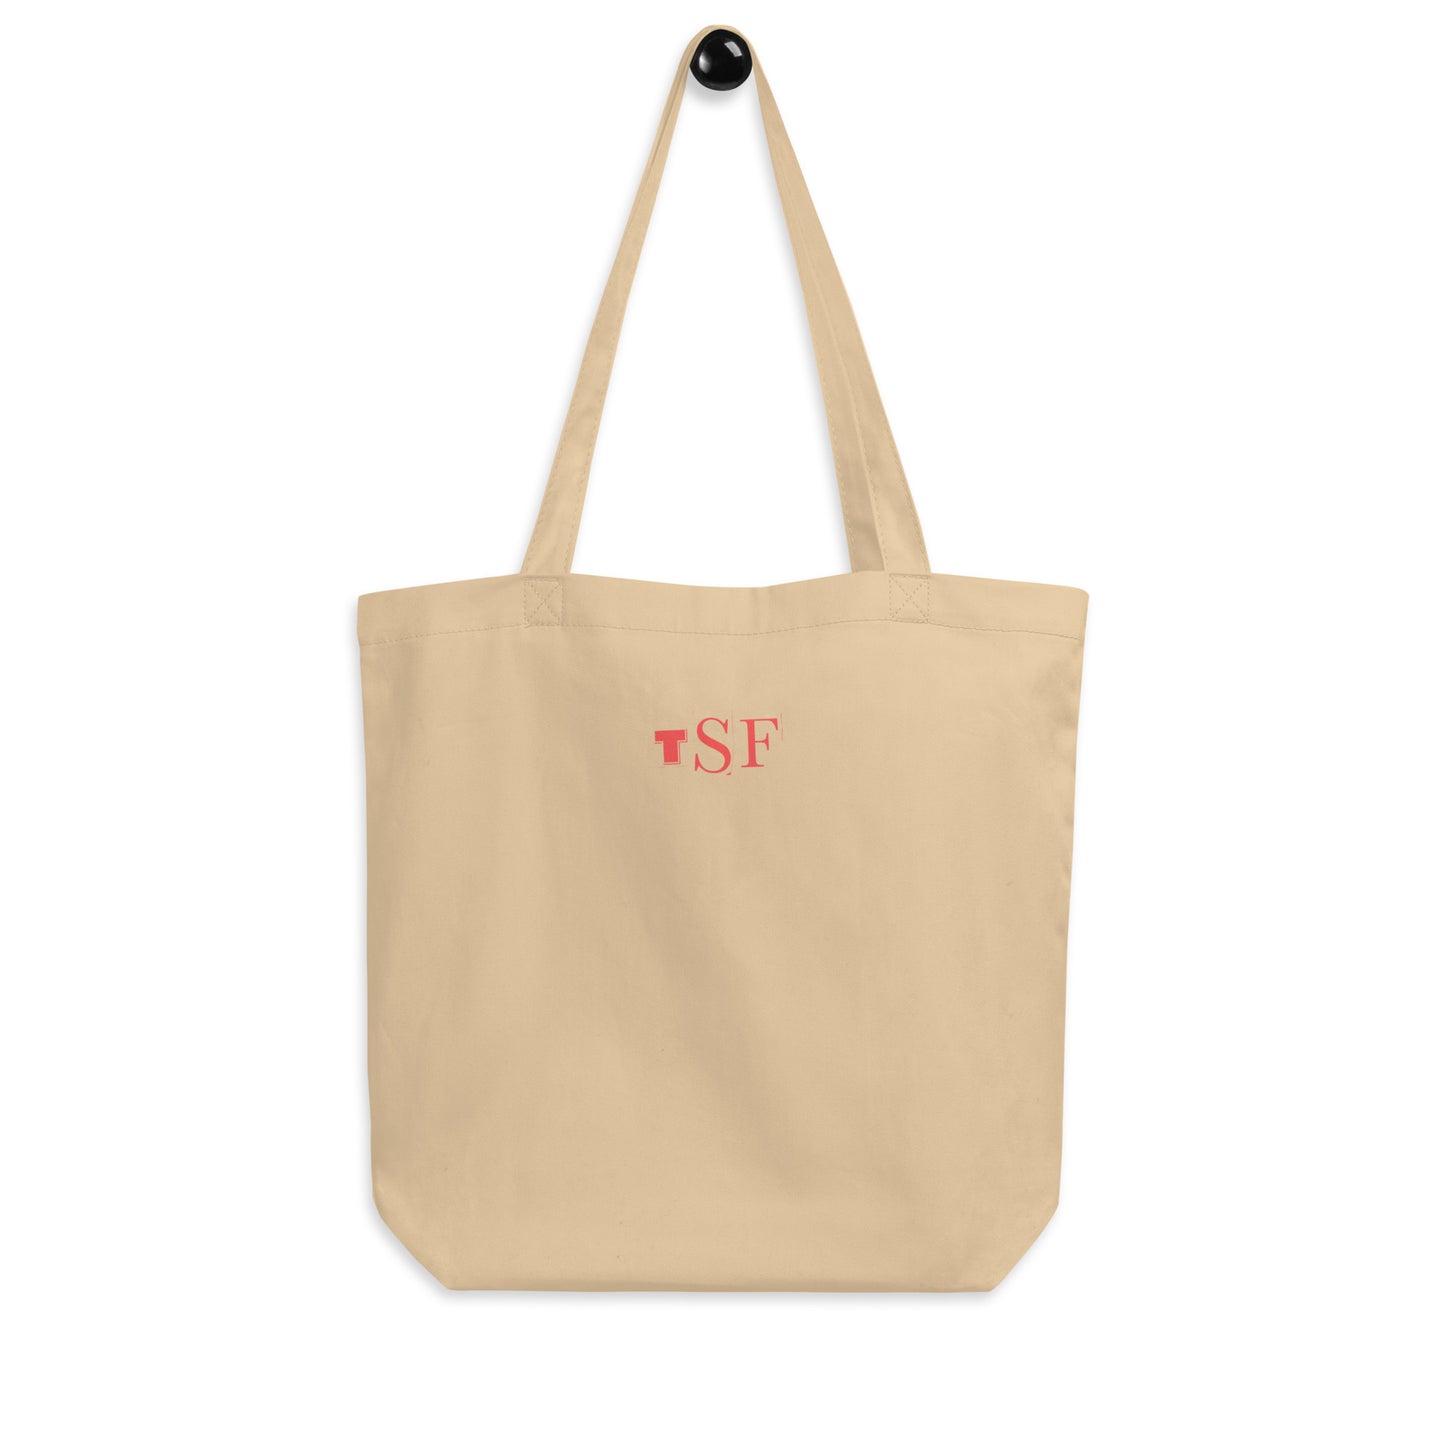 Treat People With Kindness - Eco Tote Bag